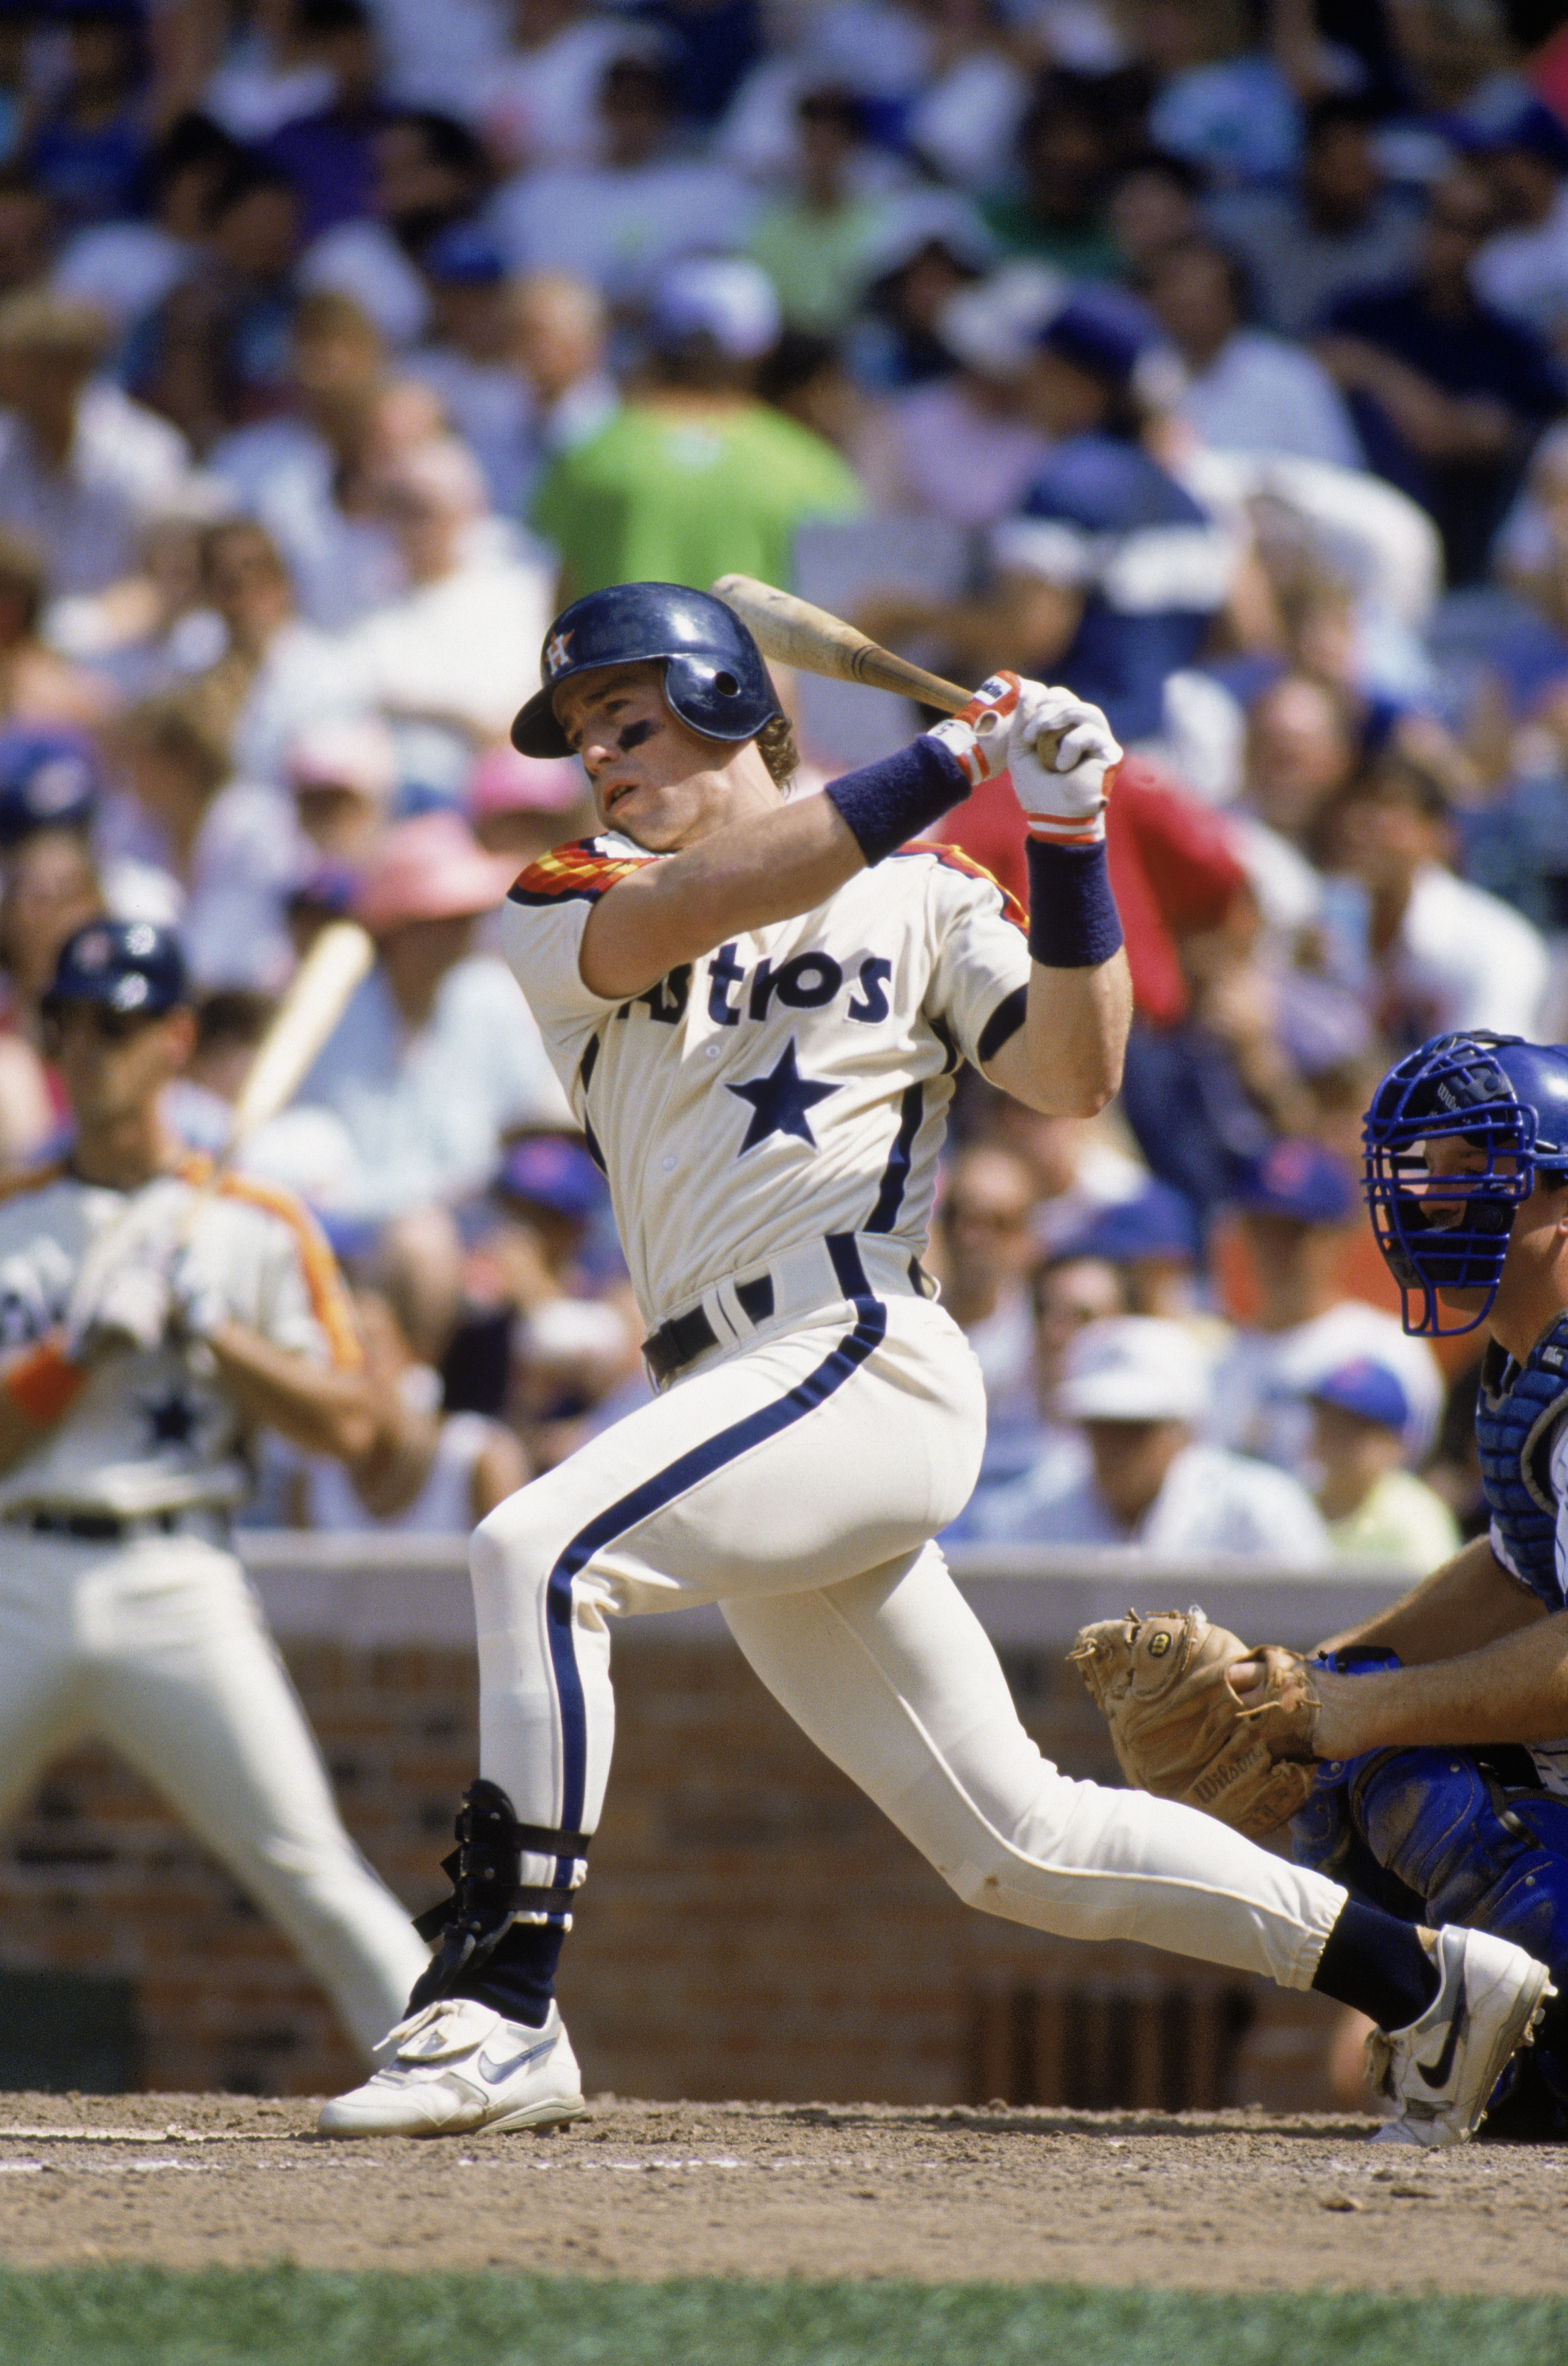 CHICAGO - 1991:  First baseman Jeff Bagwell #5 of the Houston Astros swings at the pitch during the MLB game against the Chicago Cubs at Wrigley Field during the 1991 season in Chicago, Illinois.  (Photo by Jonathan Daniel/Getty Images)